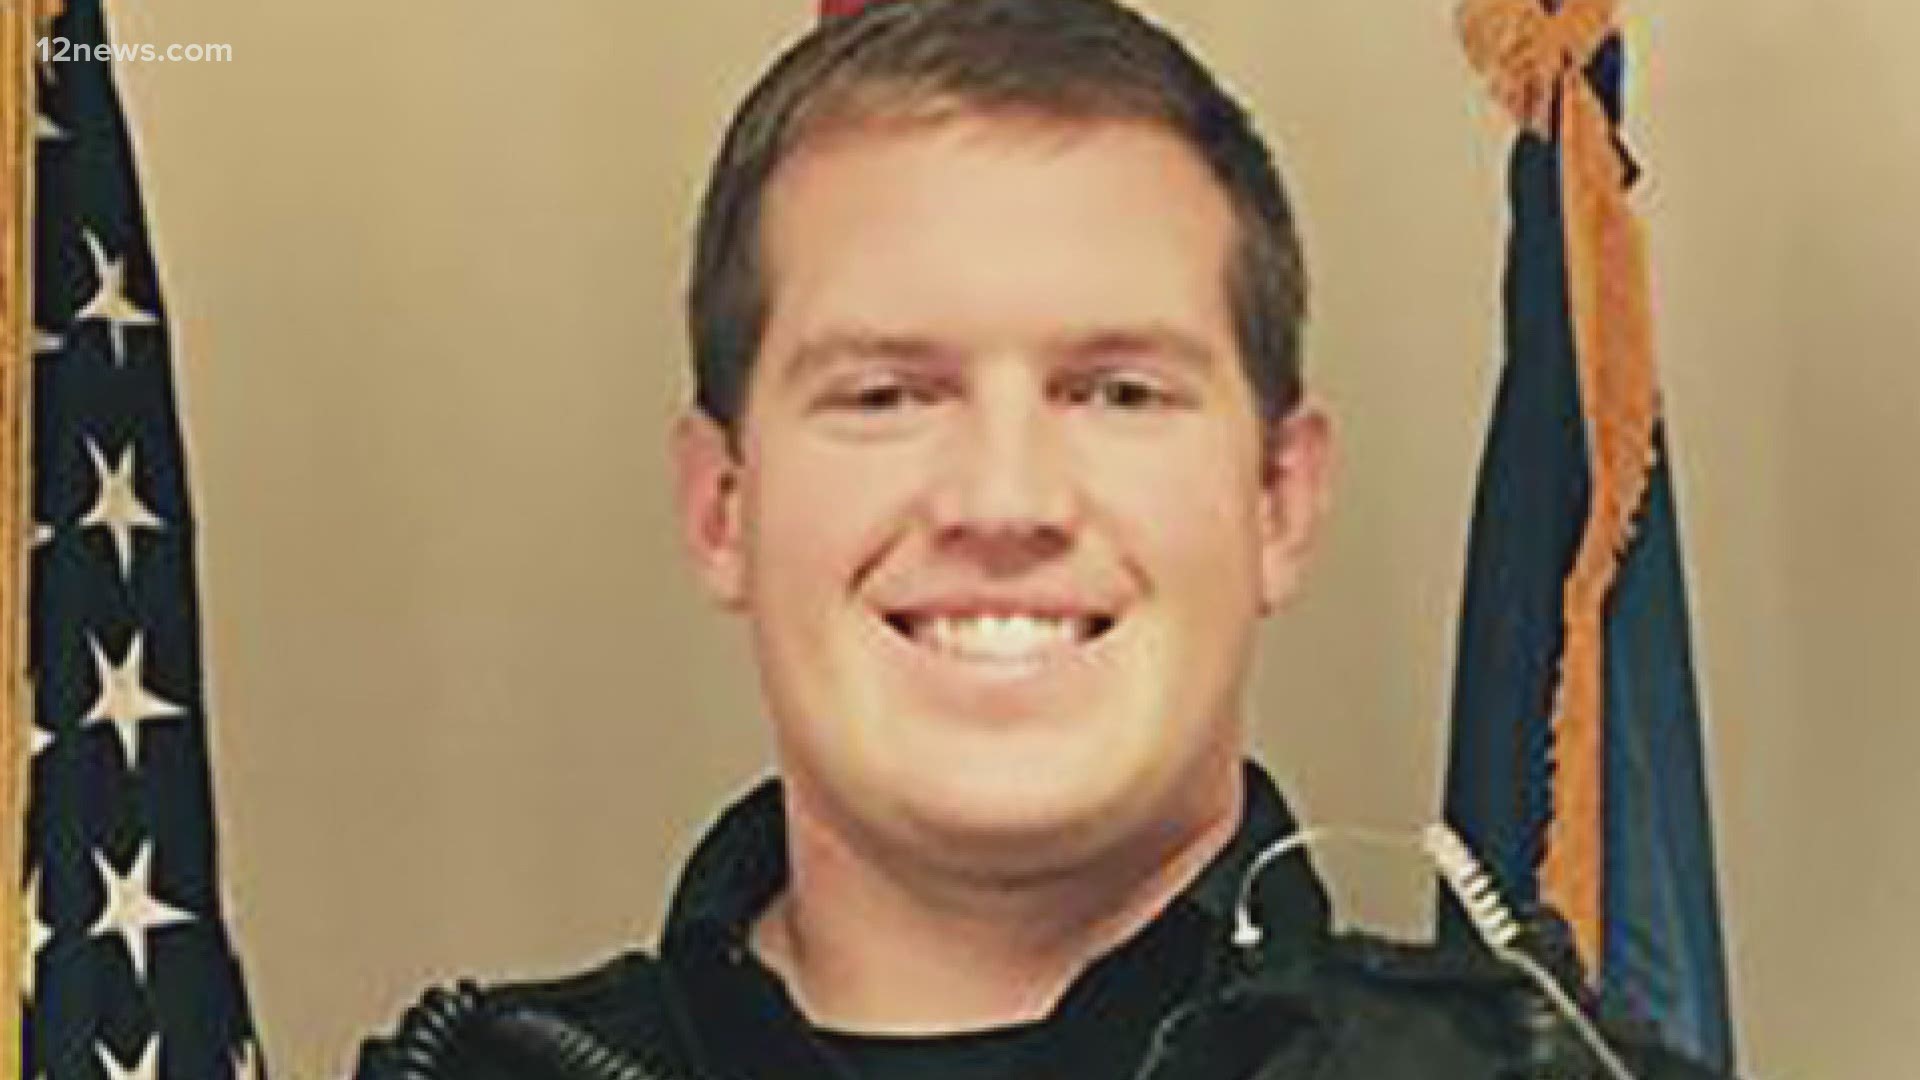 Officer Brian Brugman is expected to be okay after he was shot in the line of duty. Brugman was shot while attempting to make a traffic stop.